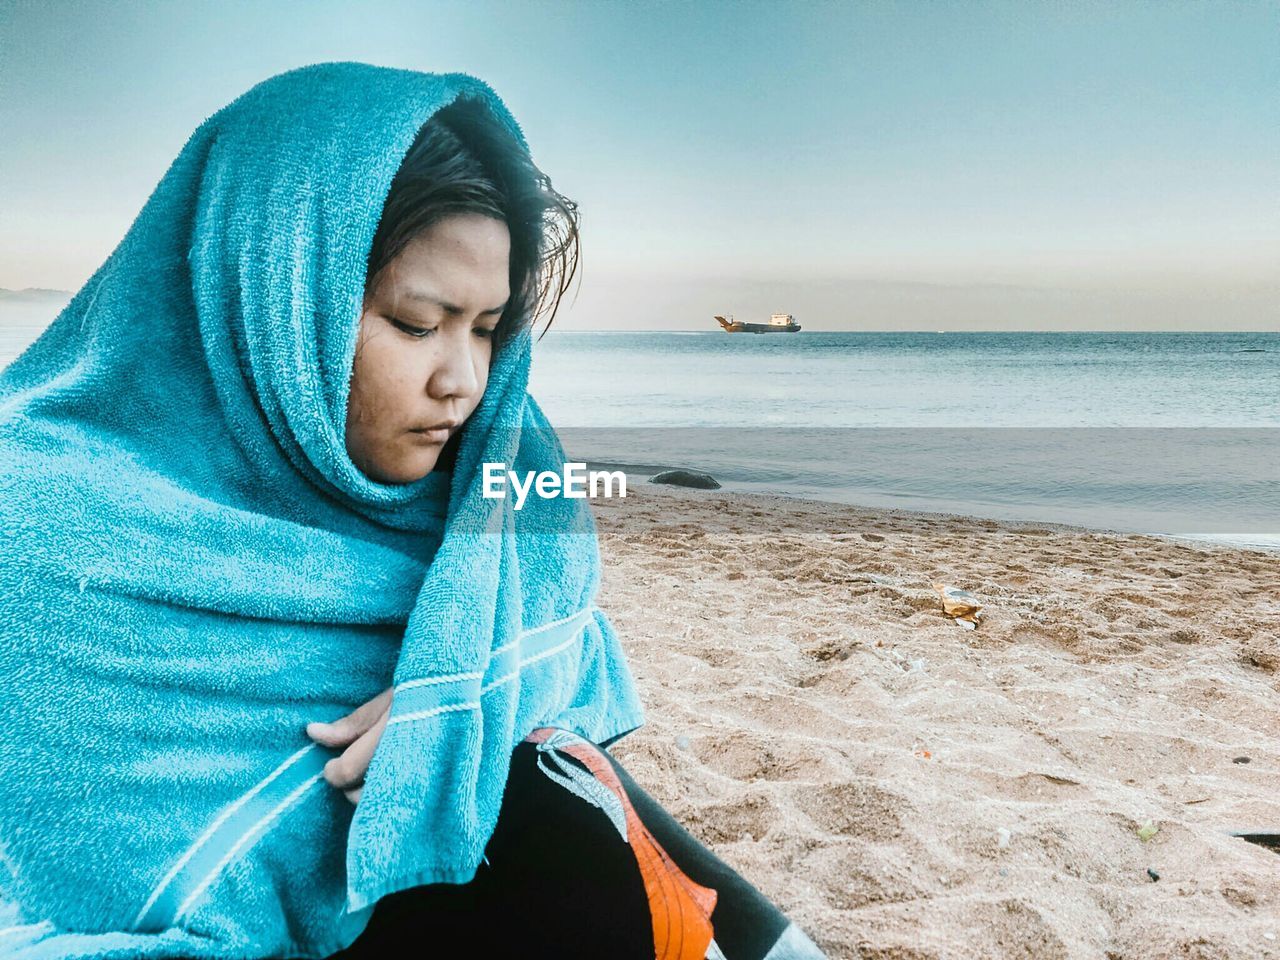 Woman wrapped in towel while sitting at beach